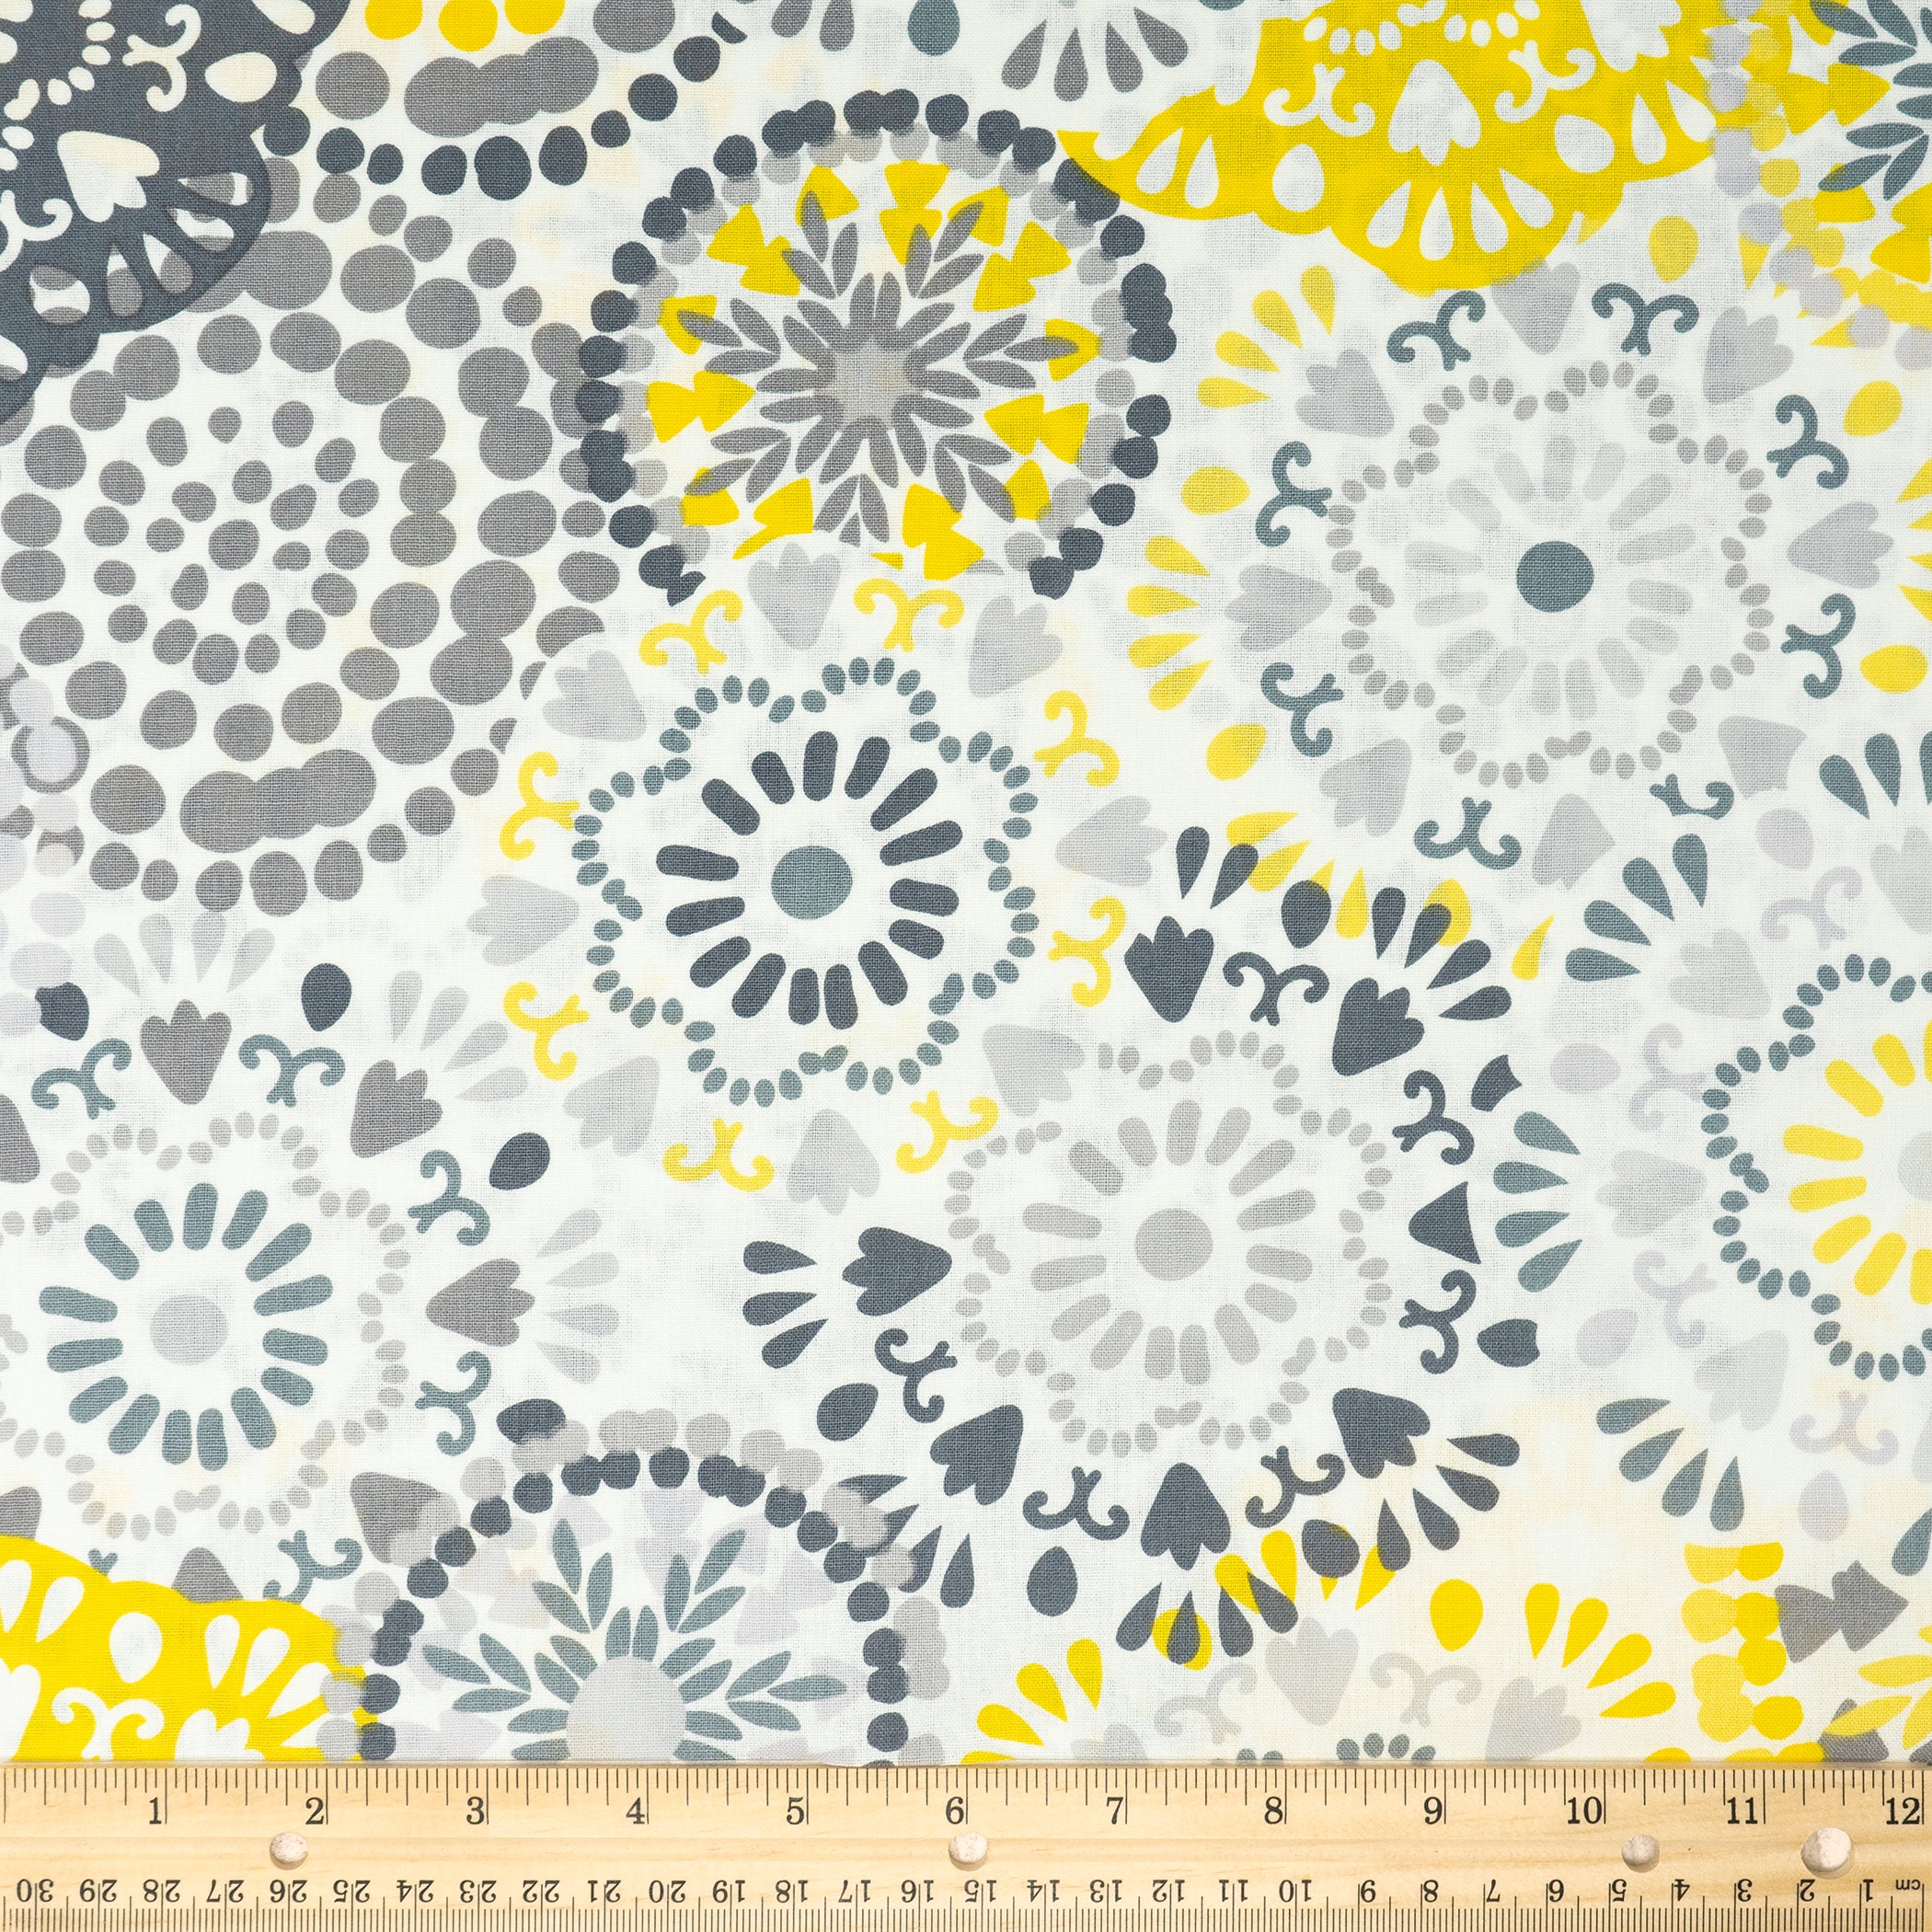 Waverly Inspirations Cotton 44" Big Wheels Steel Color Sewing Fabric by the Yard